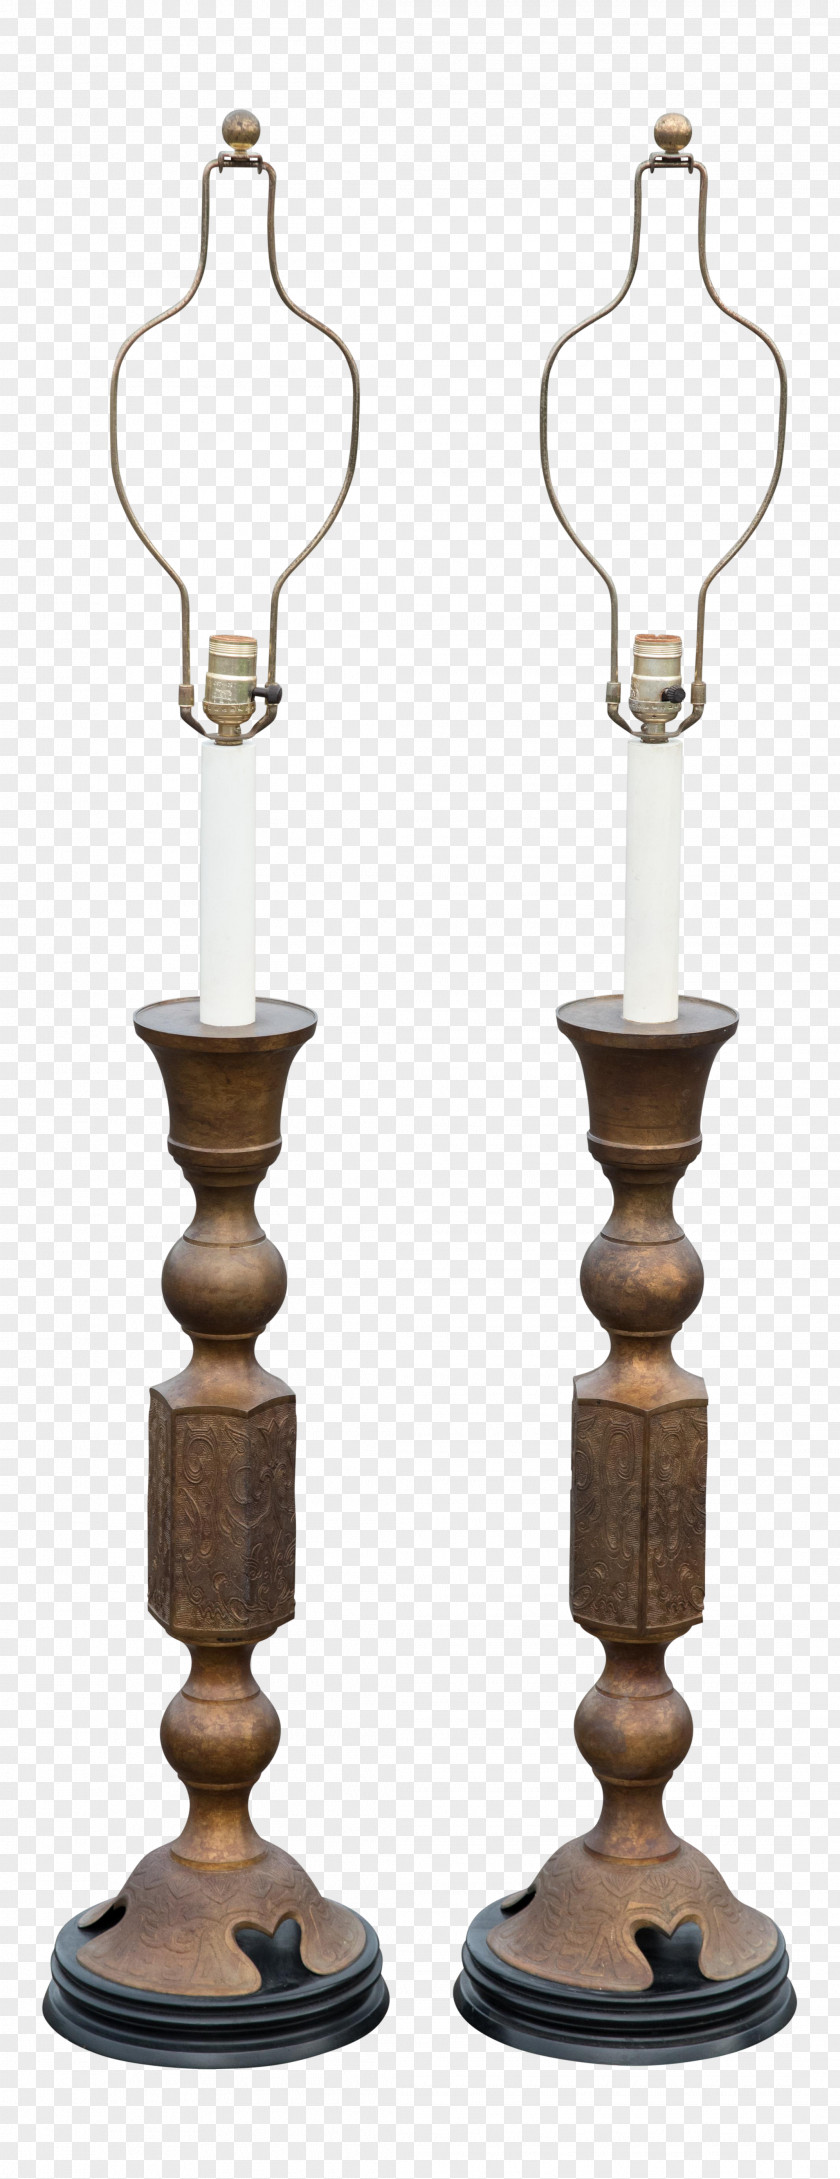 Table Light Fixture Electric Altar Candle PNG